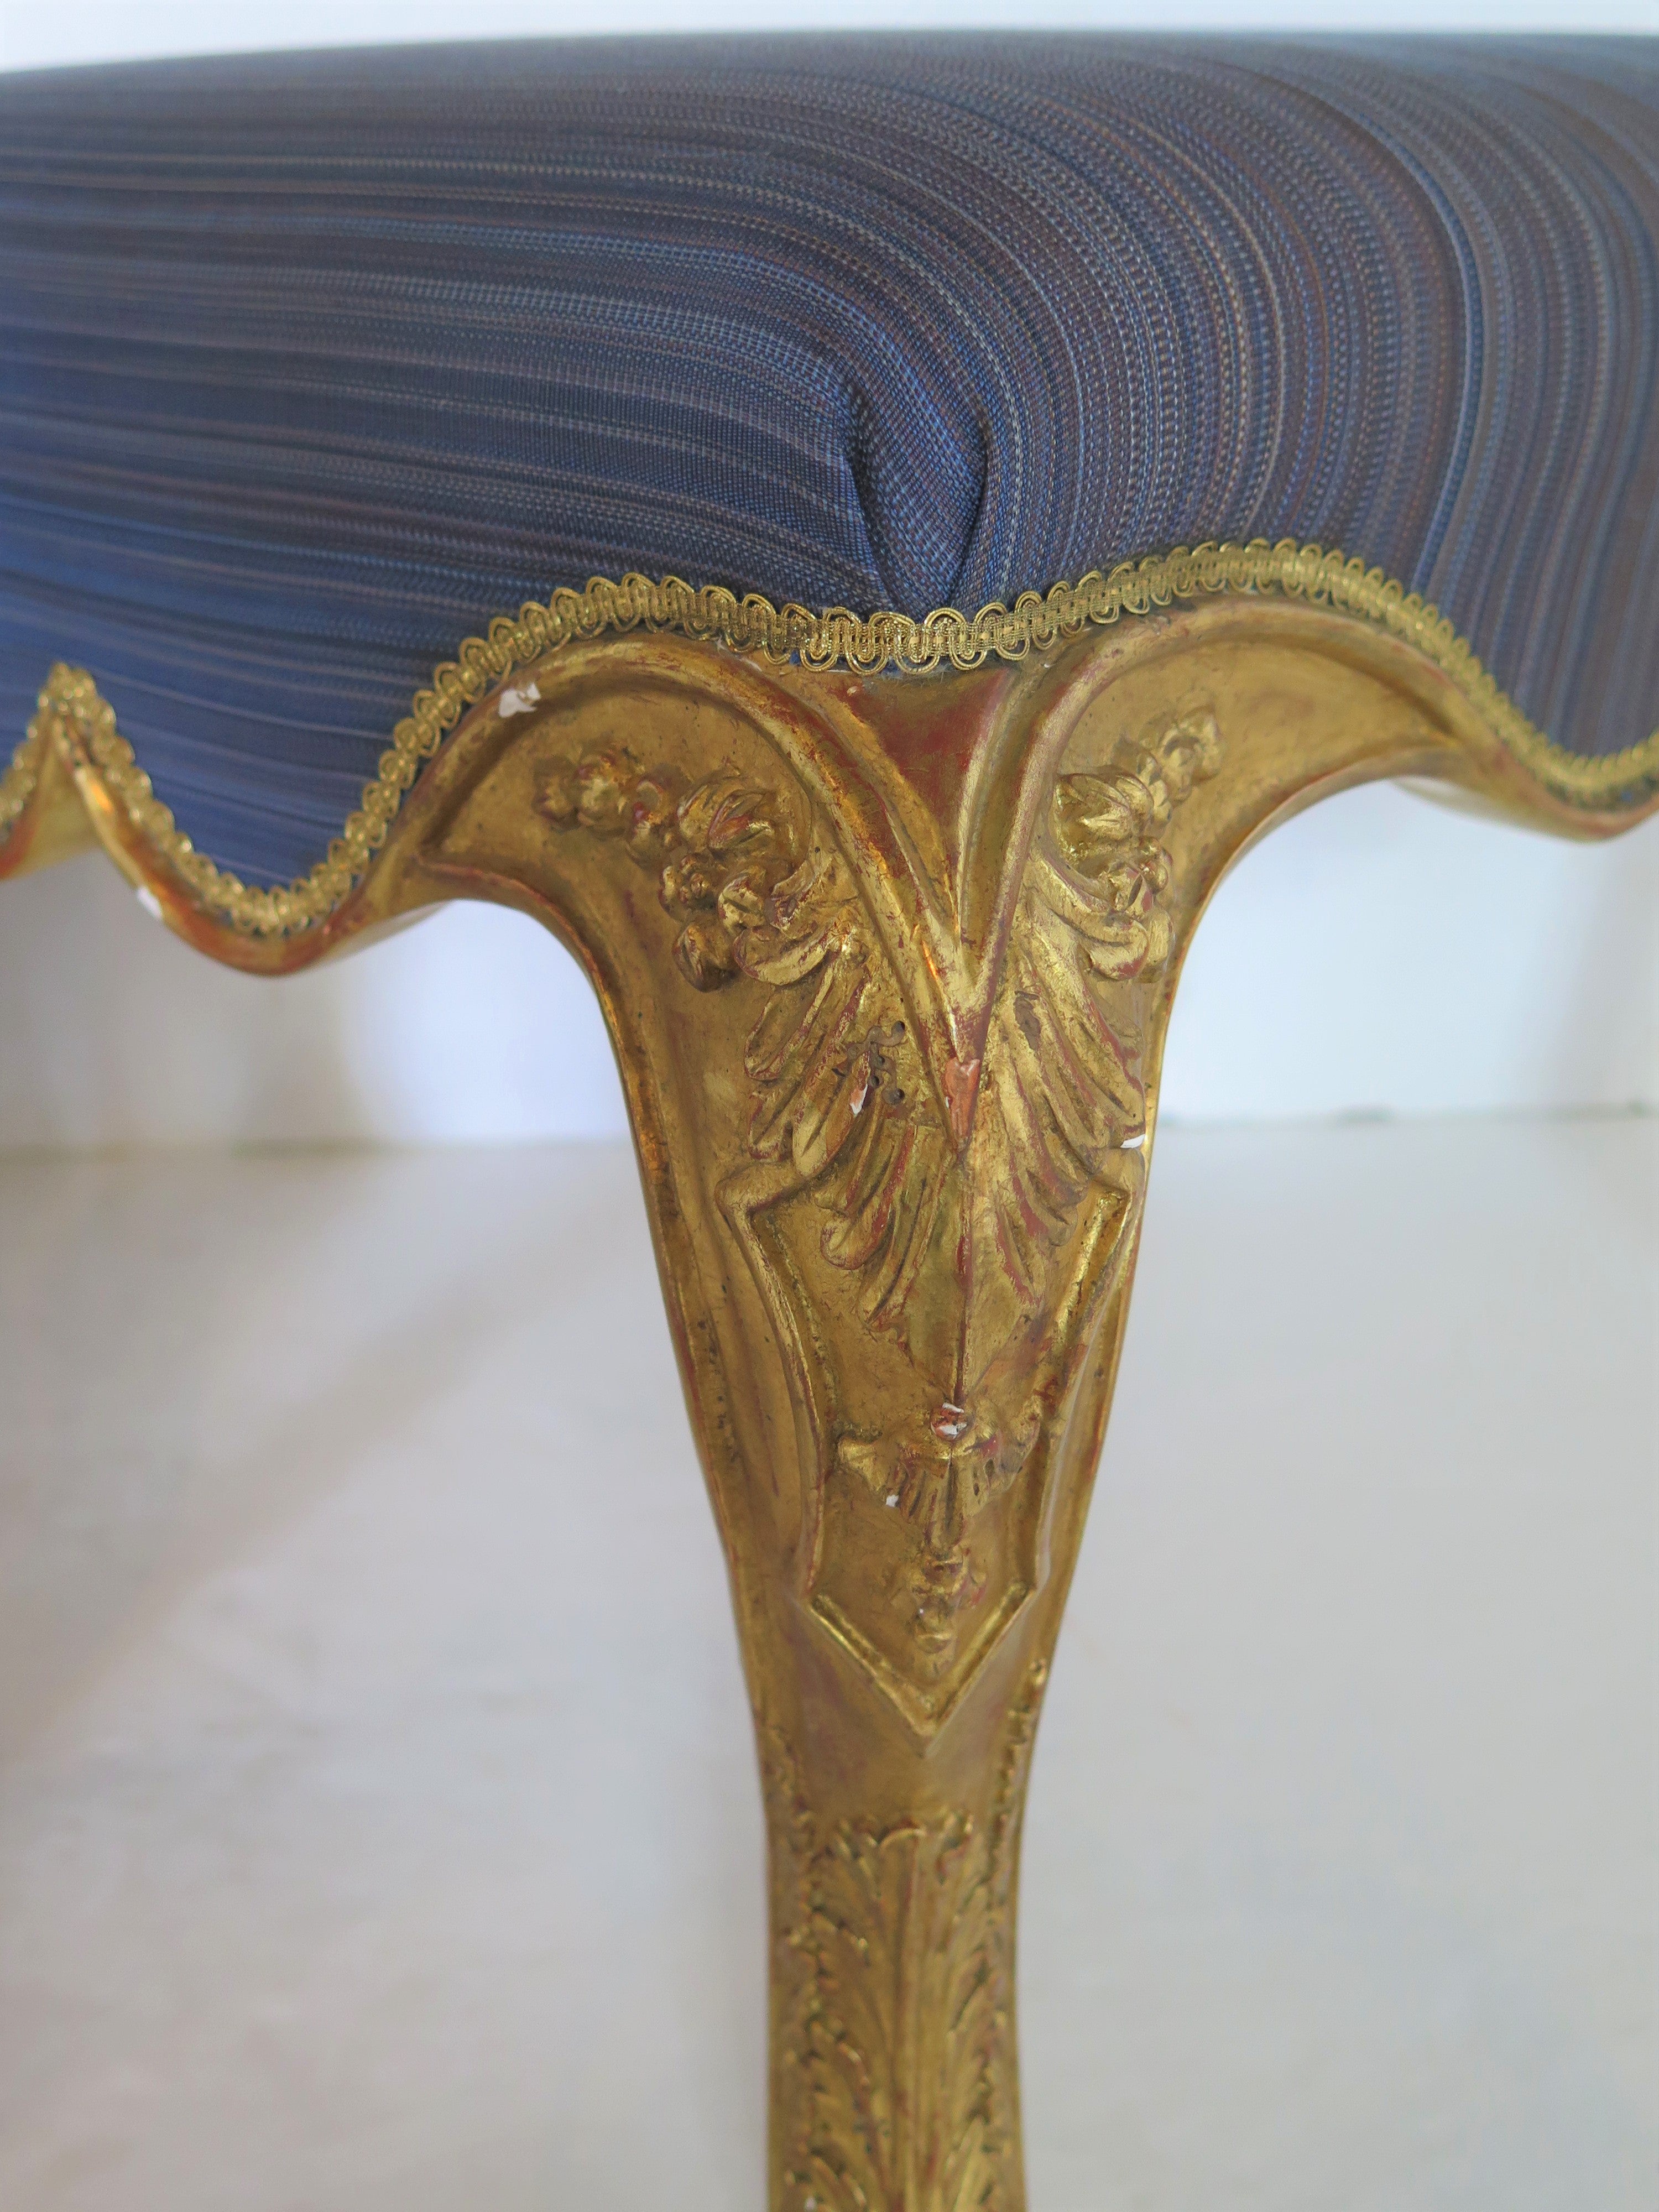 Pair of Petite Régence-Style Carved and Gilded Stools